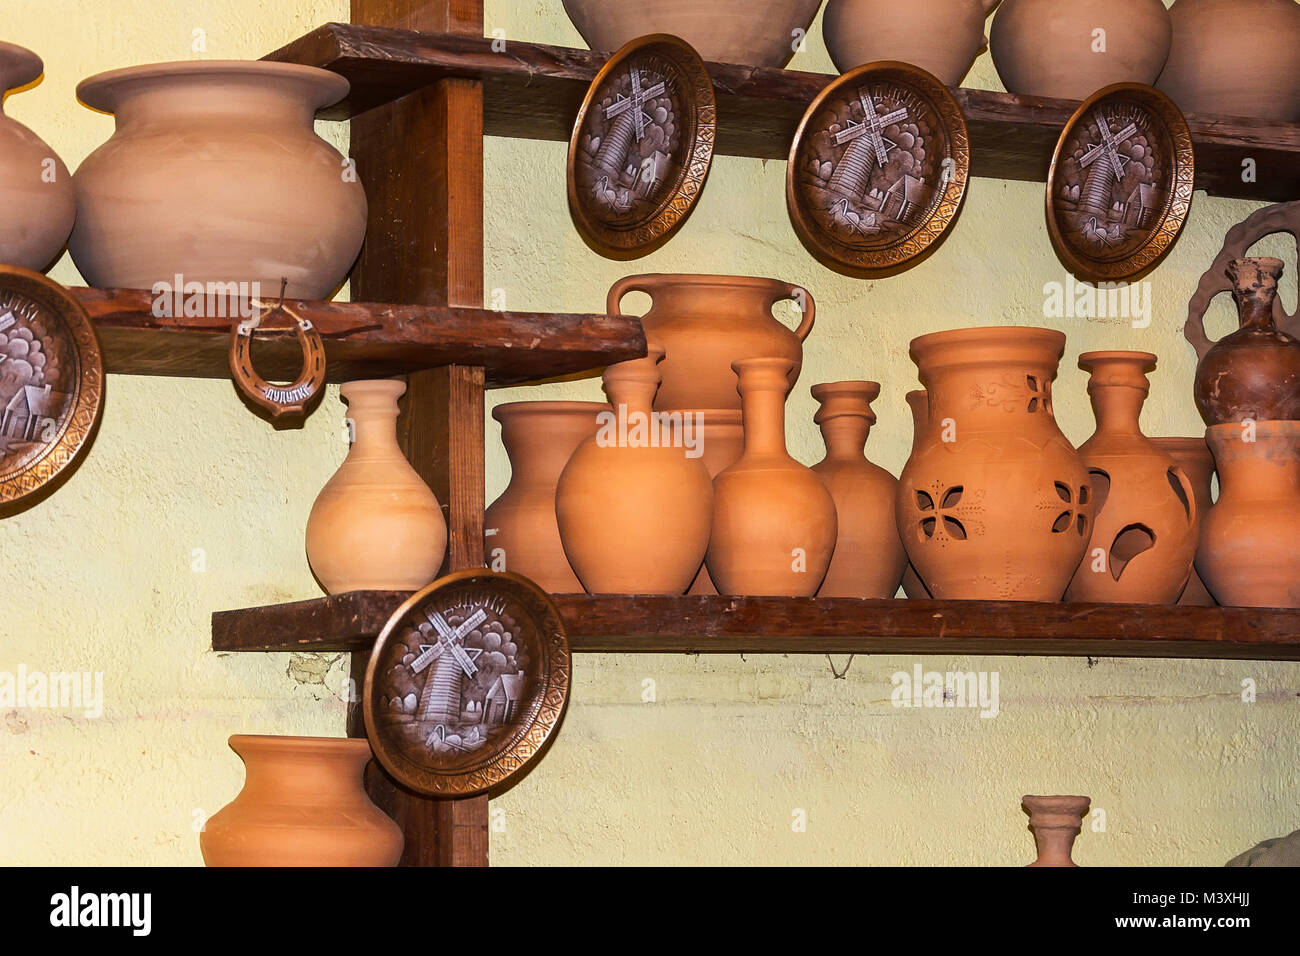 Belarus, Dududki - July 11, 2017: the Pottery is handmade to rural life, ancient craft Stock Photo